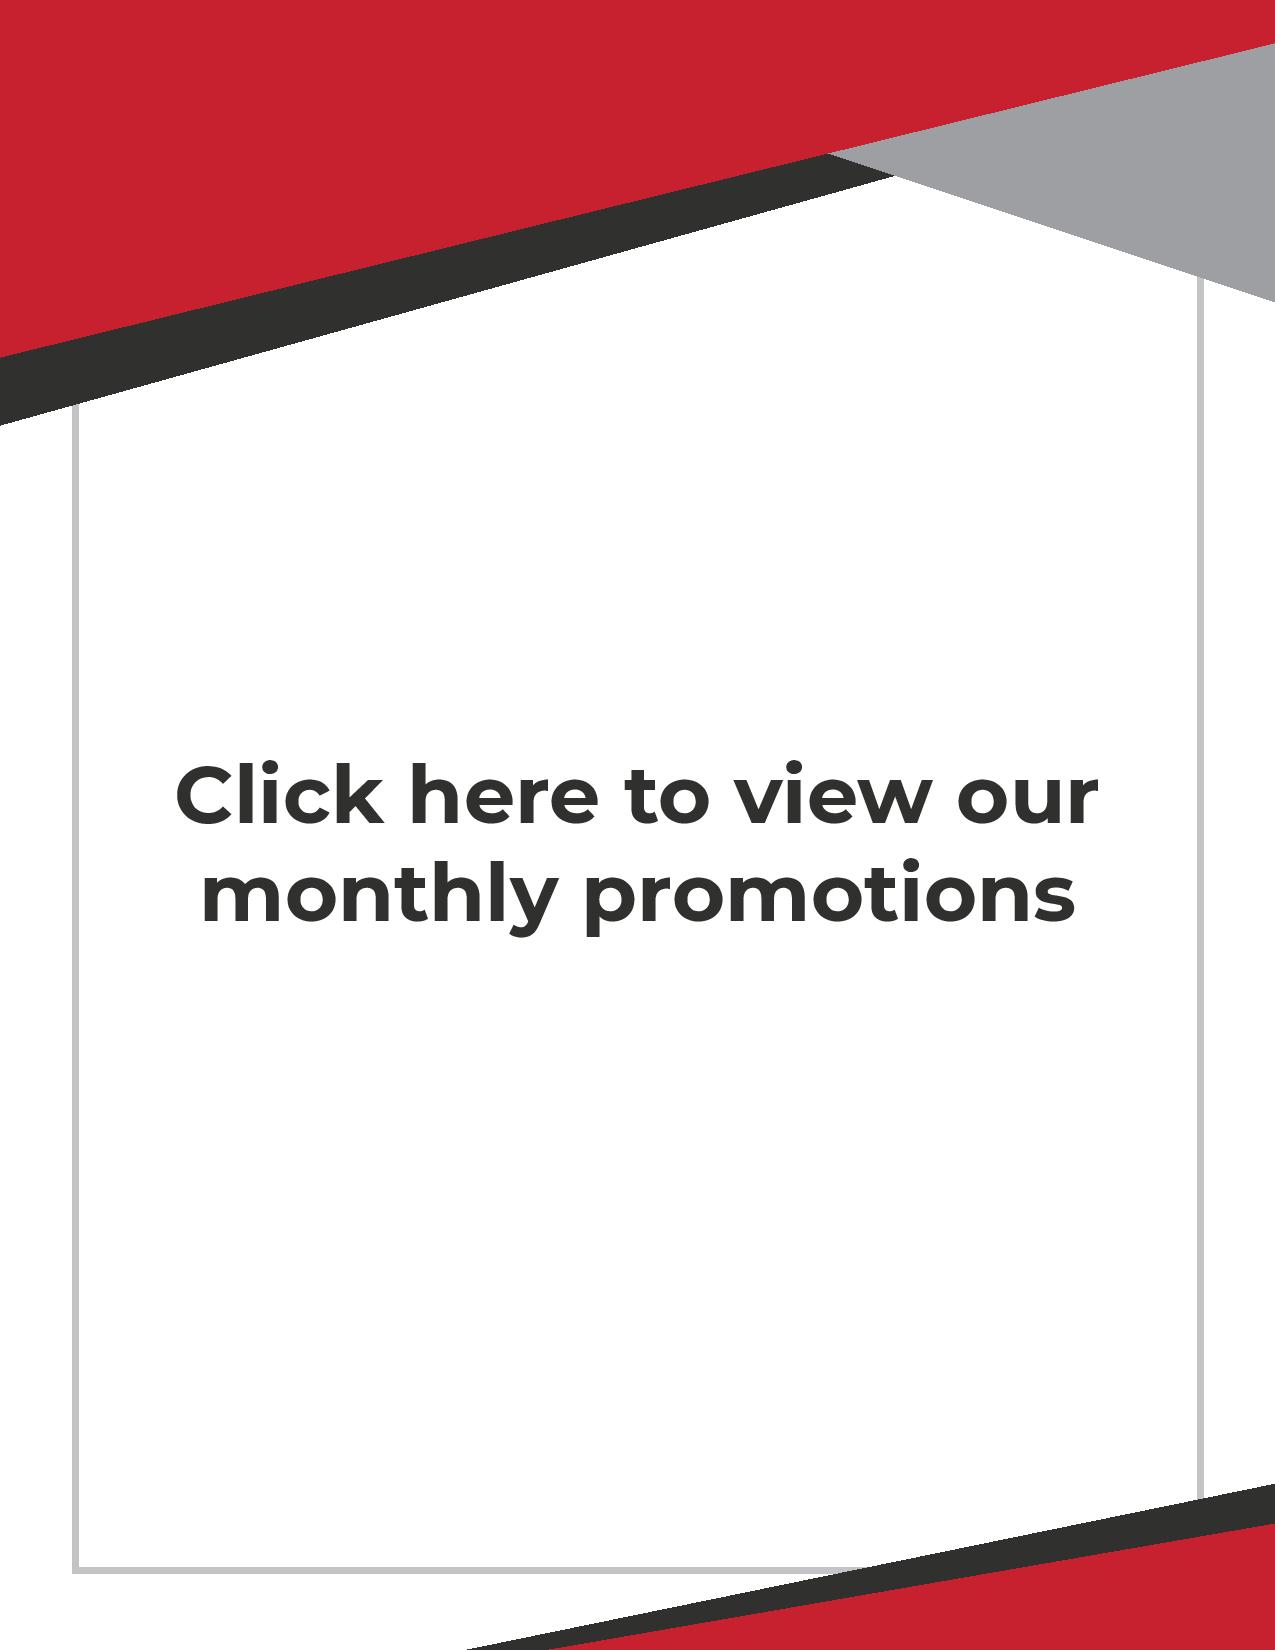 Monthly promotions flyer